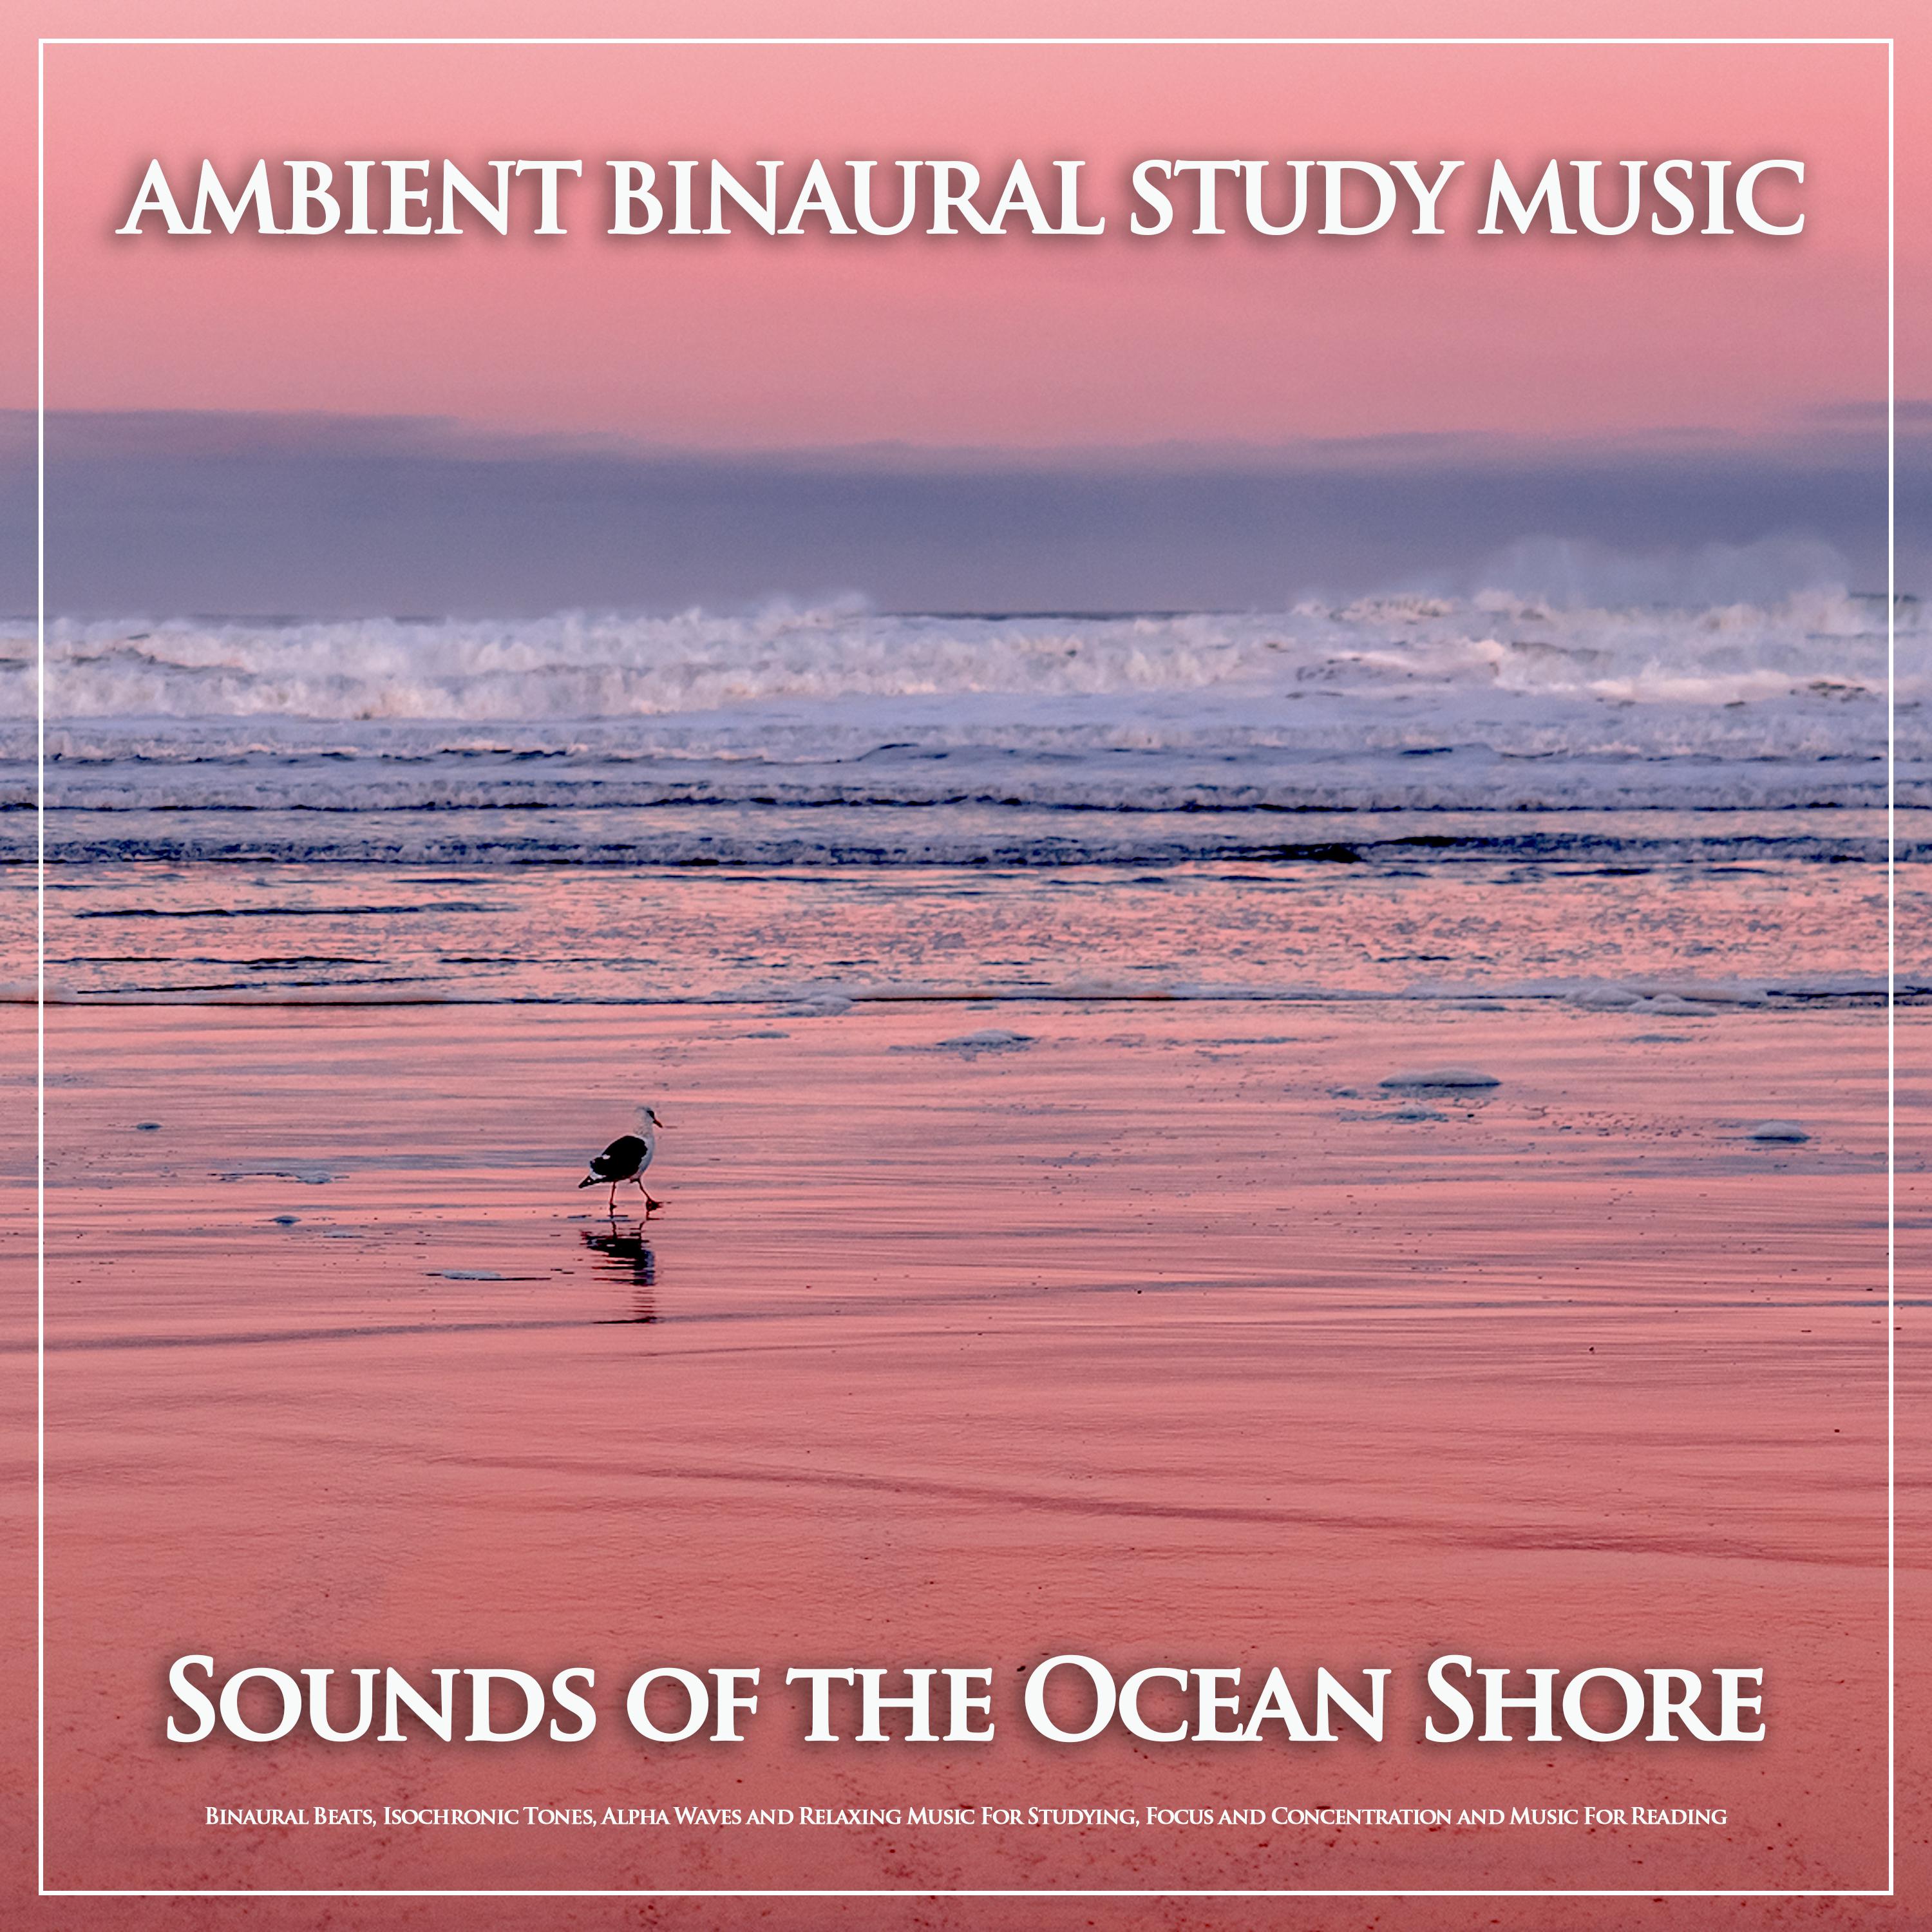 Studying Music With Ocean Waves